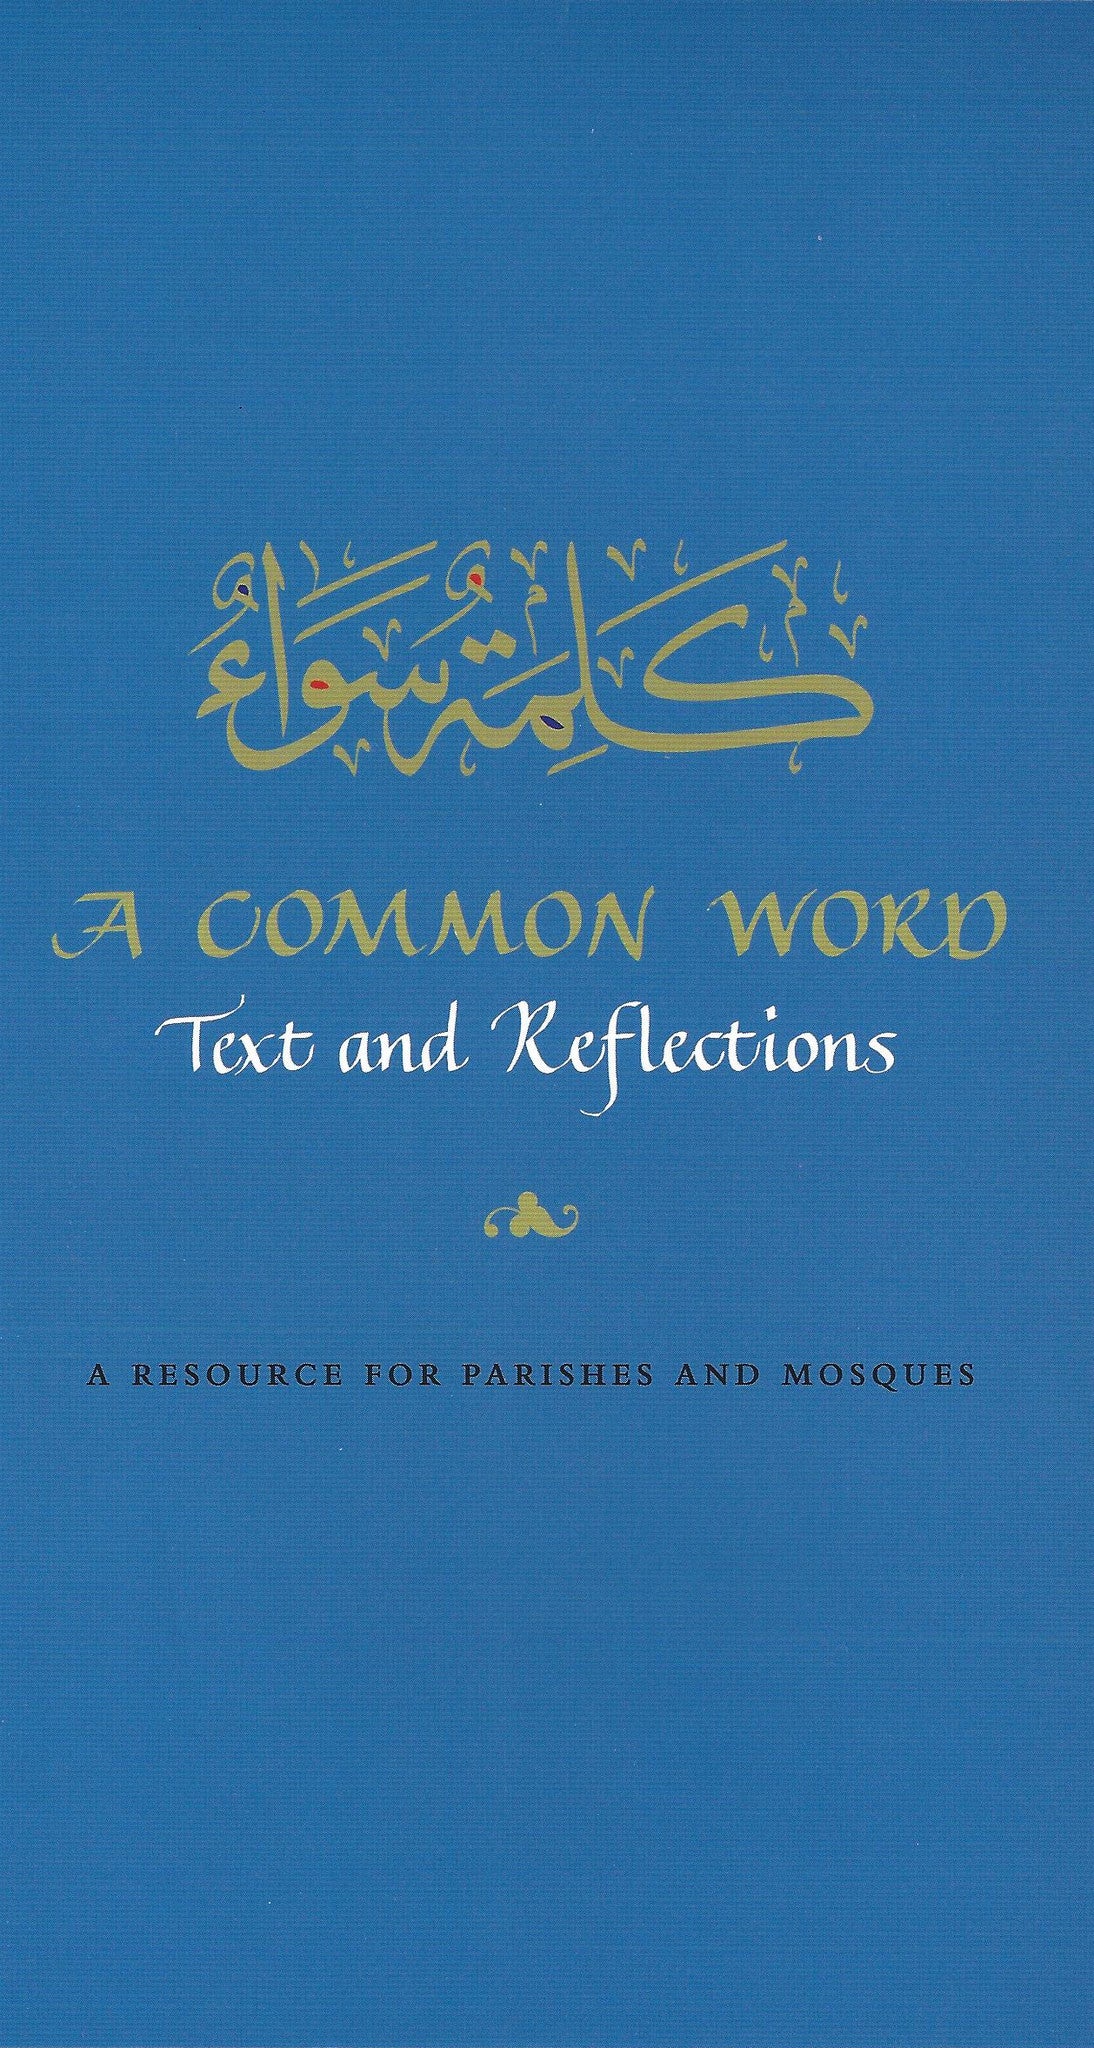 A Common Word - Text and Reflections: A Resource for Parishes and Mosques , Book - Daybreak International Bookstore, Daybreak Press Global Bookshop
